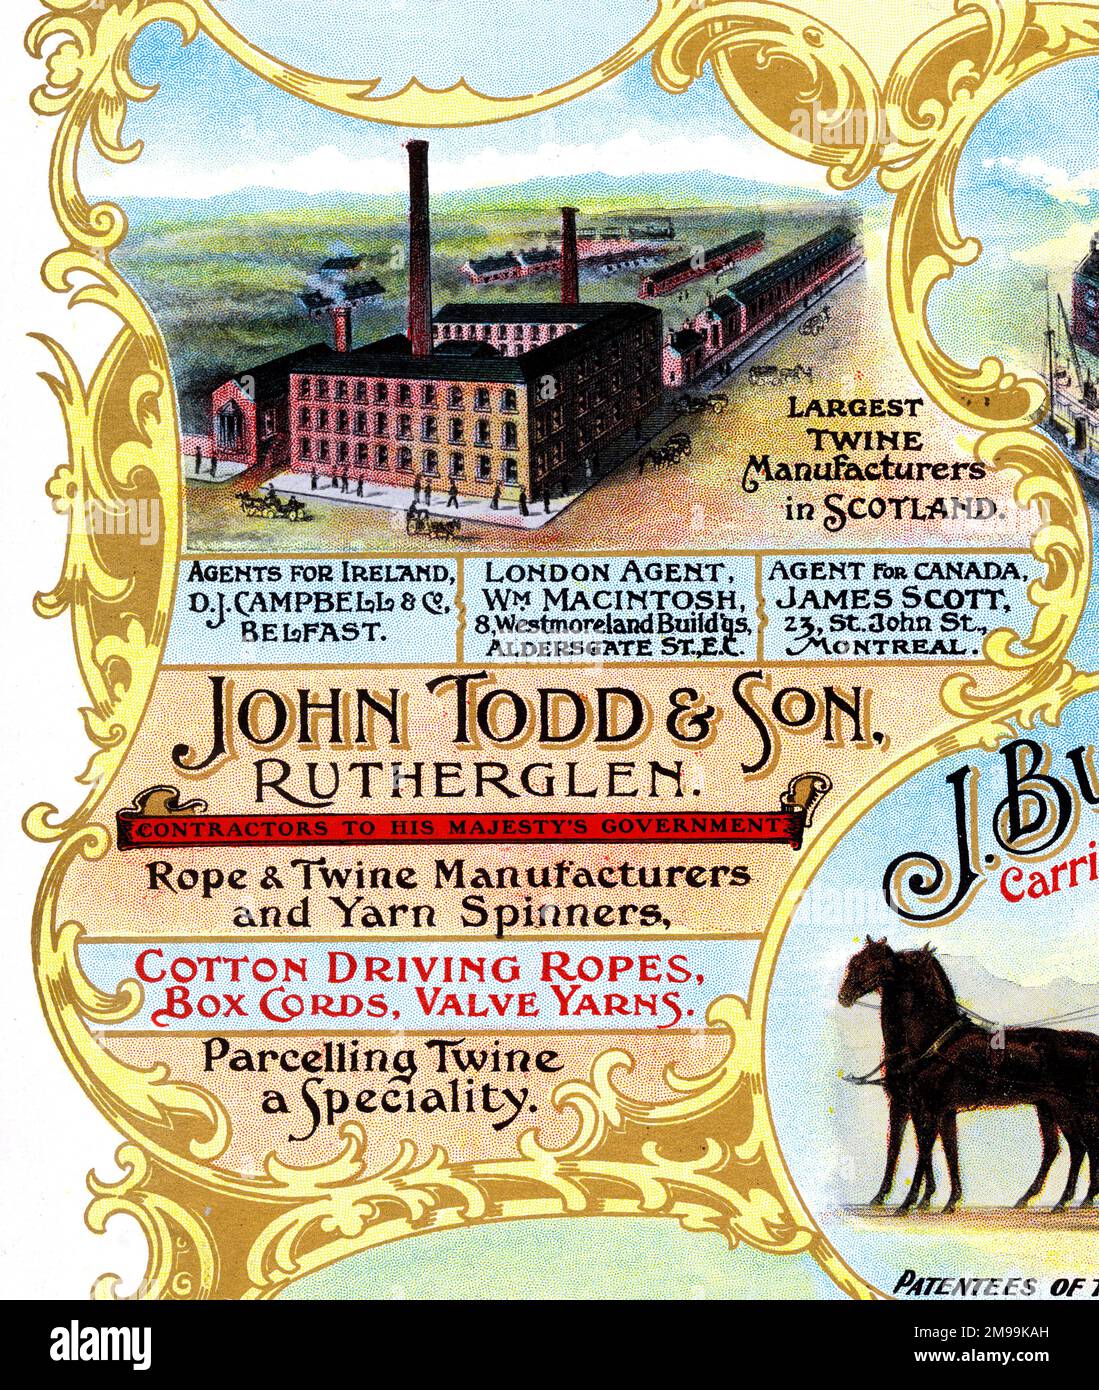 Advert for John Todd & Son, Rope and Twine Manufacturers and Yarn Spinners, Rutherglen, Scotland. Stock Photo